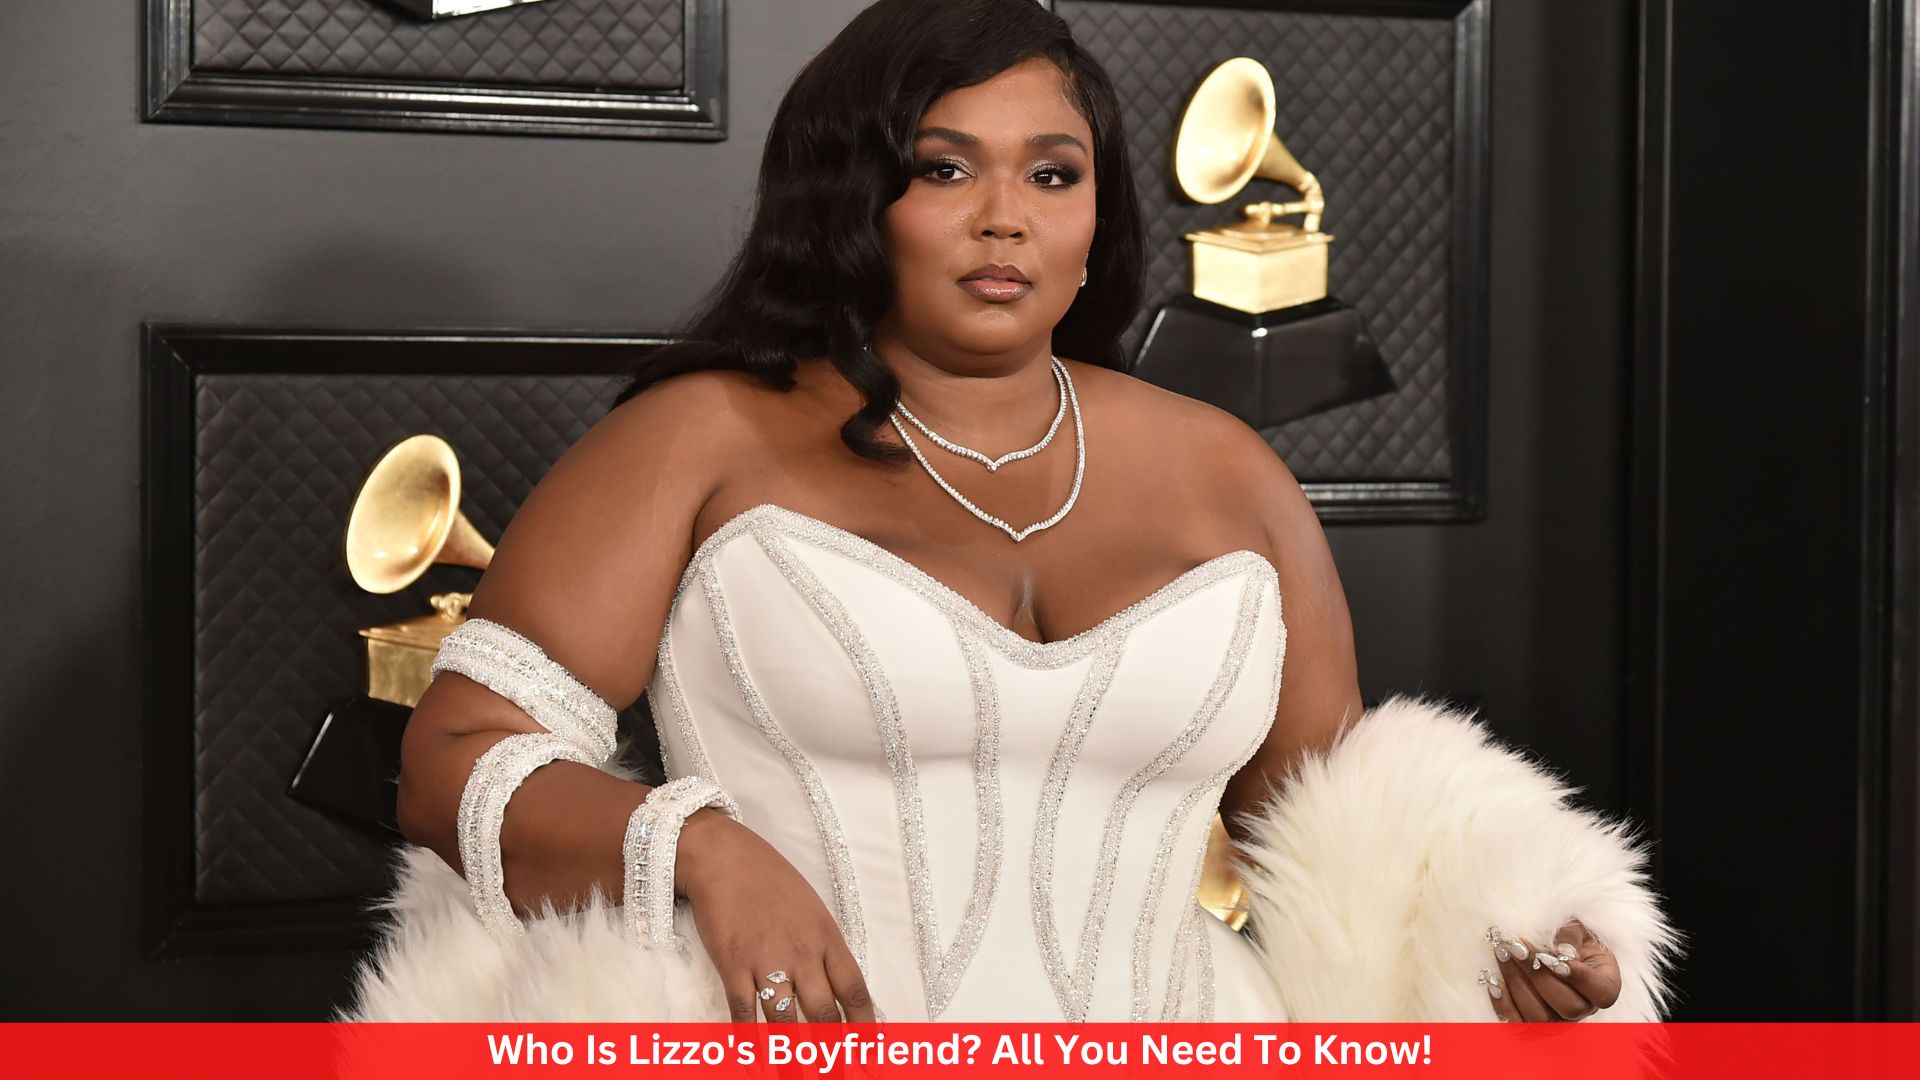 Who Is Lizzo's Boyfriend? All You Need To Know!